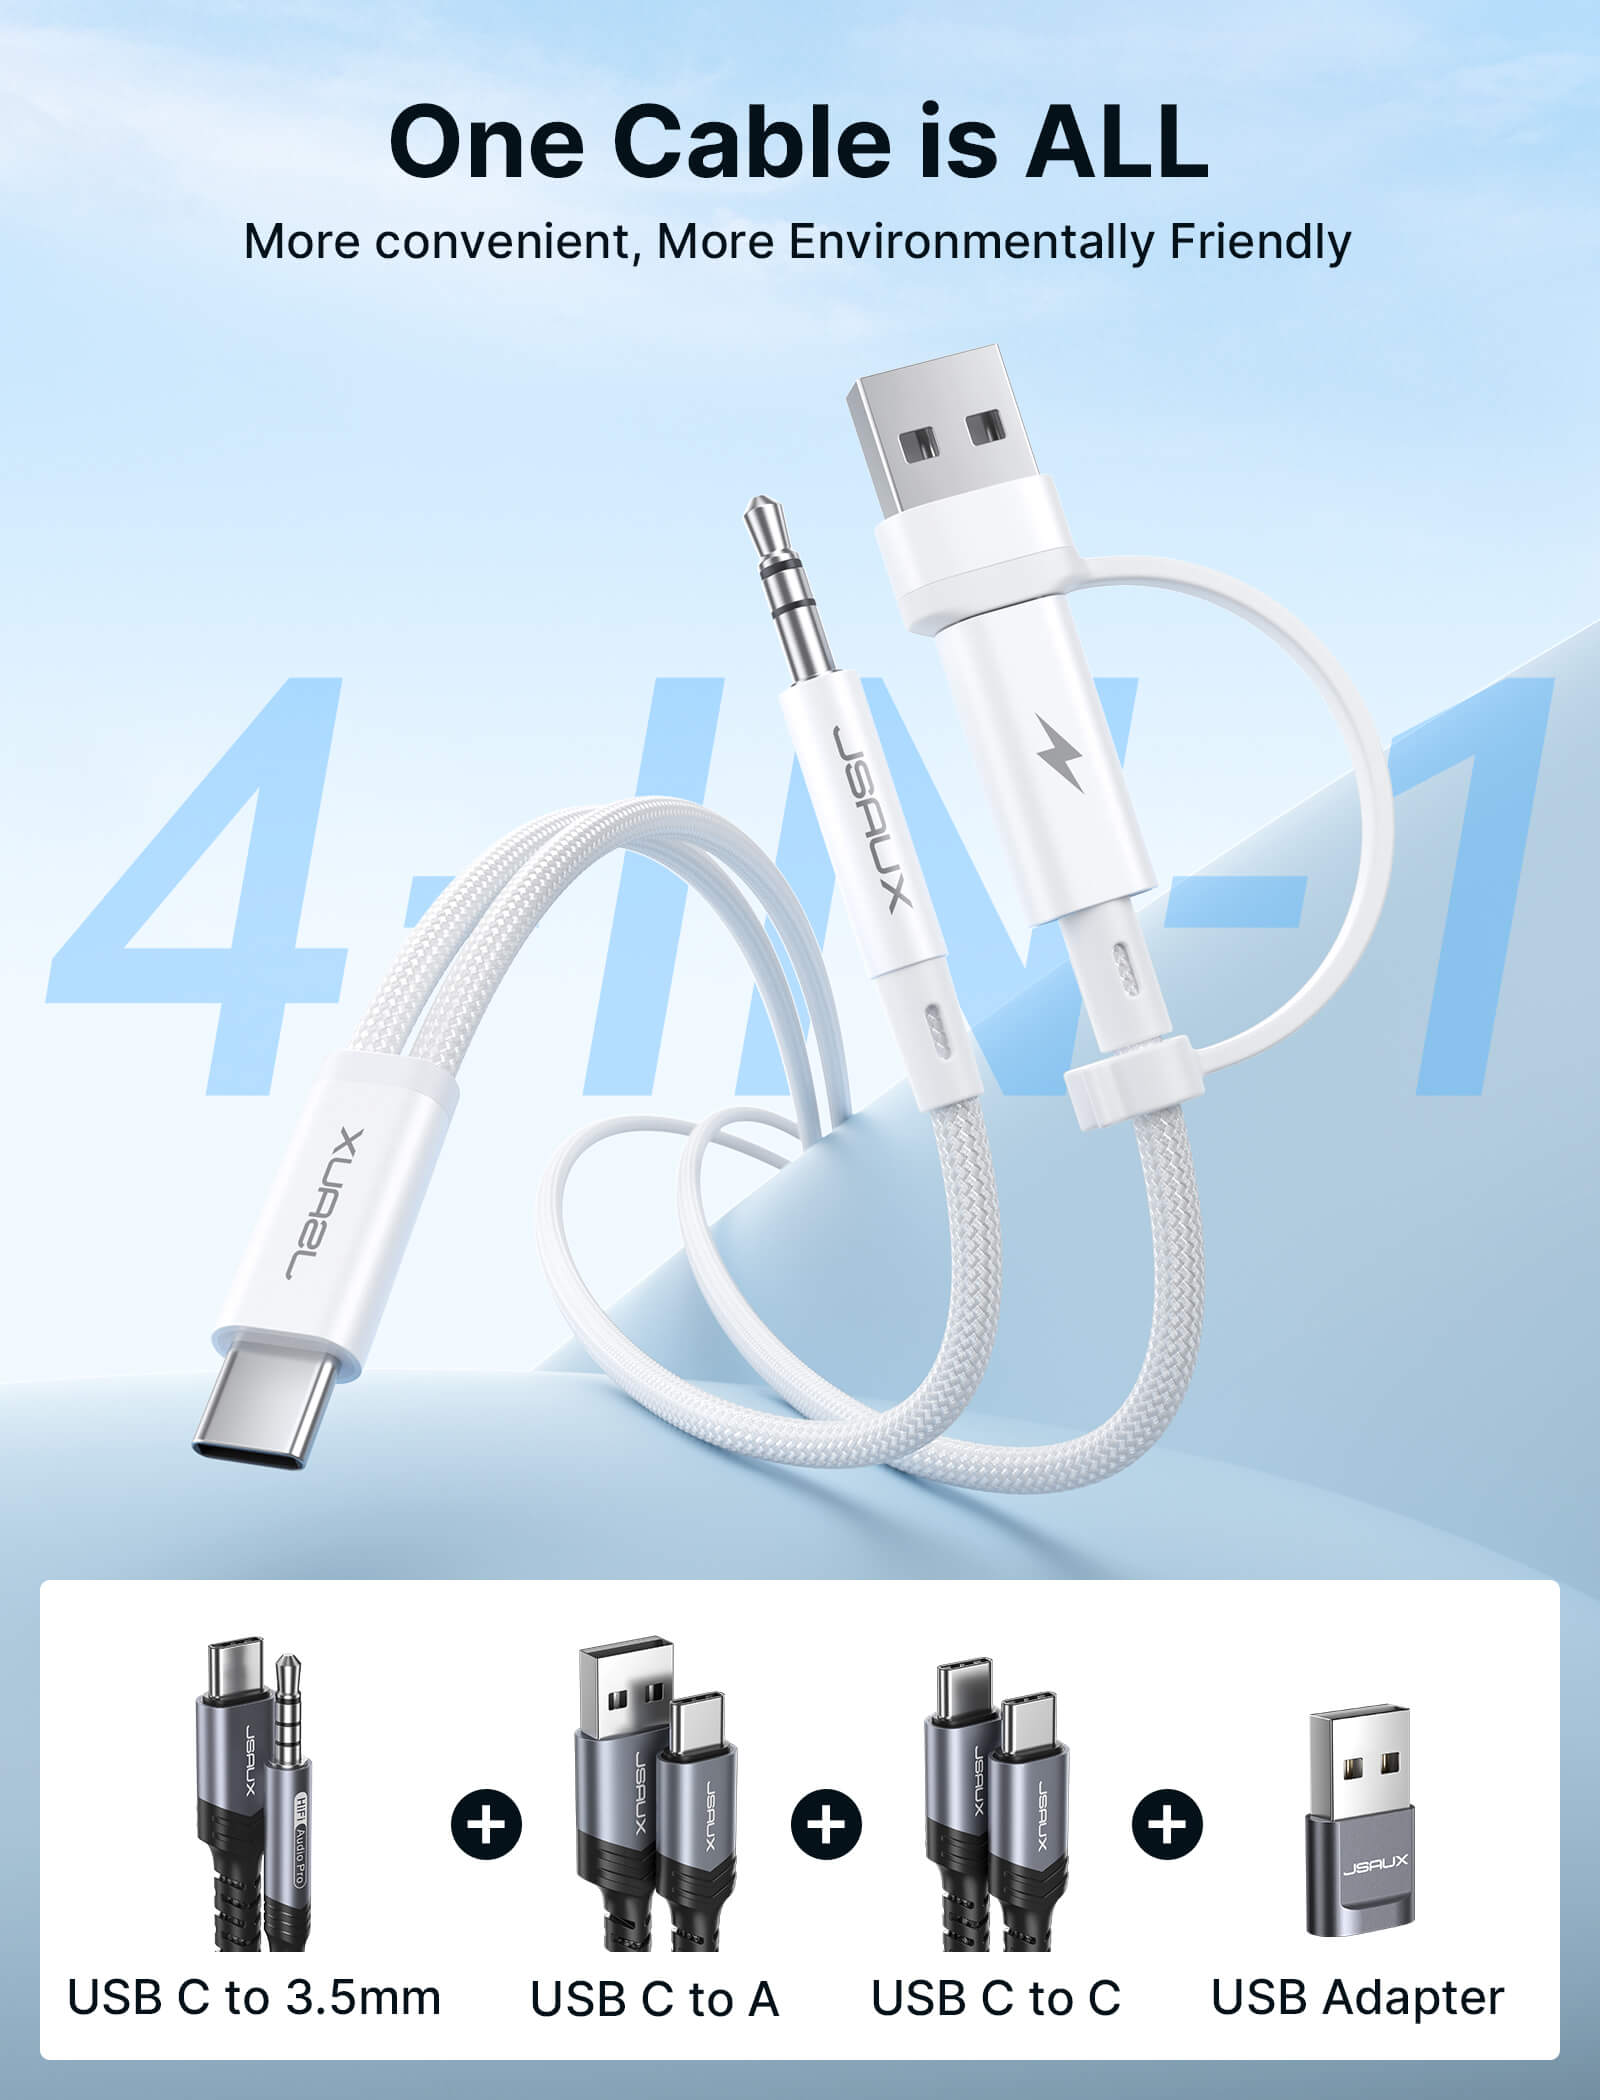 2-in-1 USB C to 3.5mm Headphone and Charger Cable